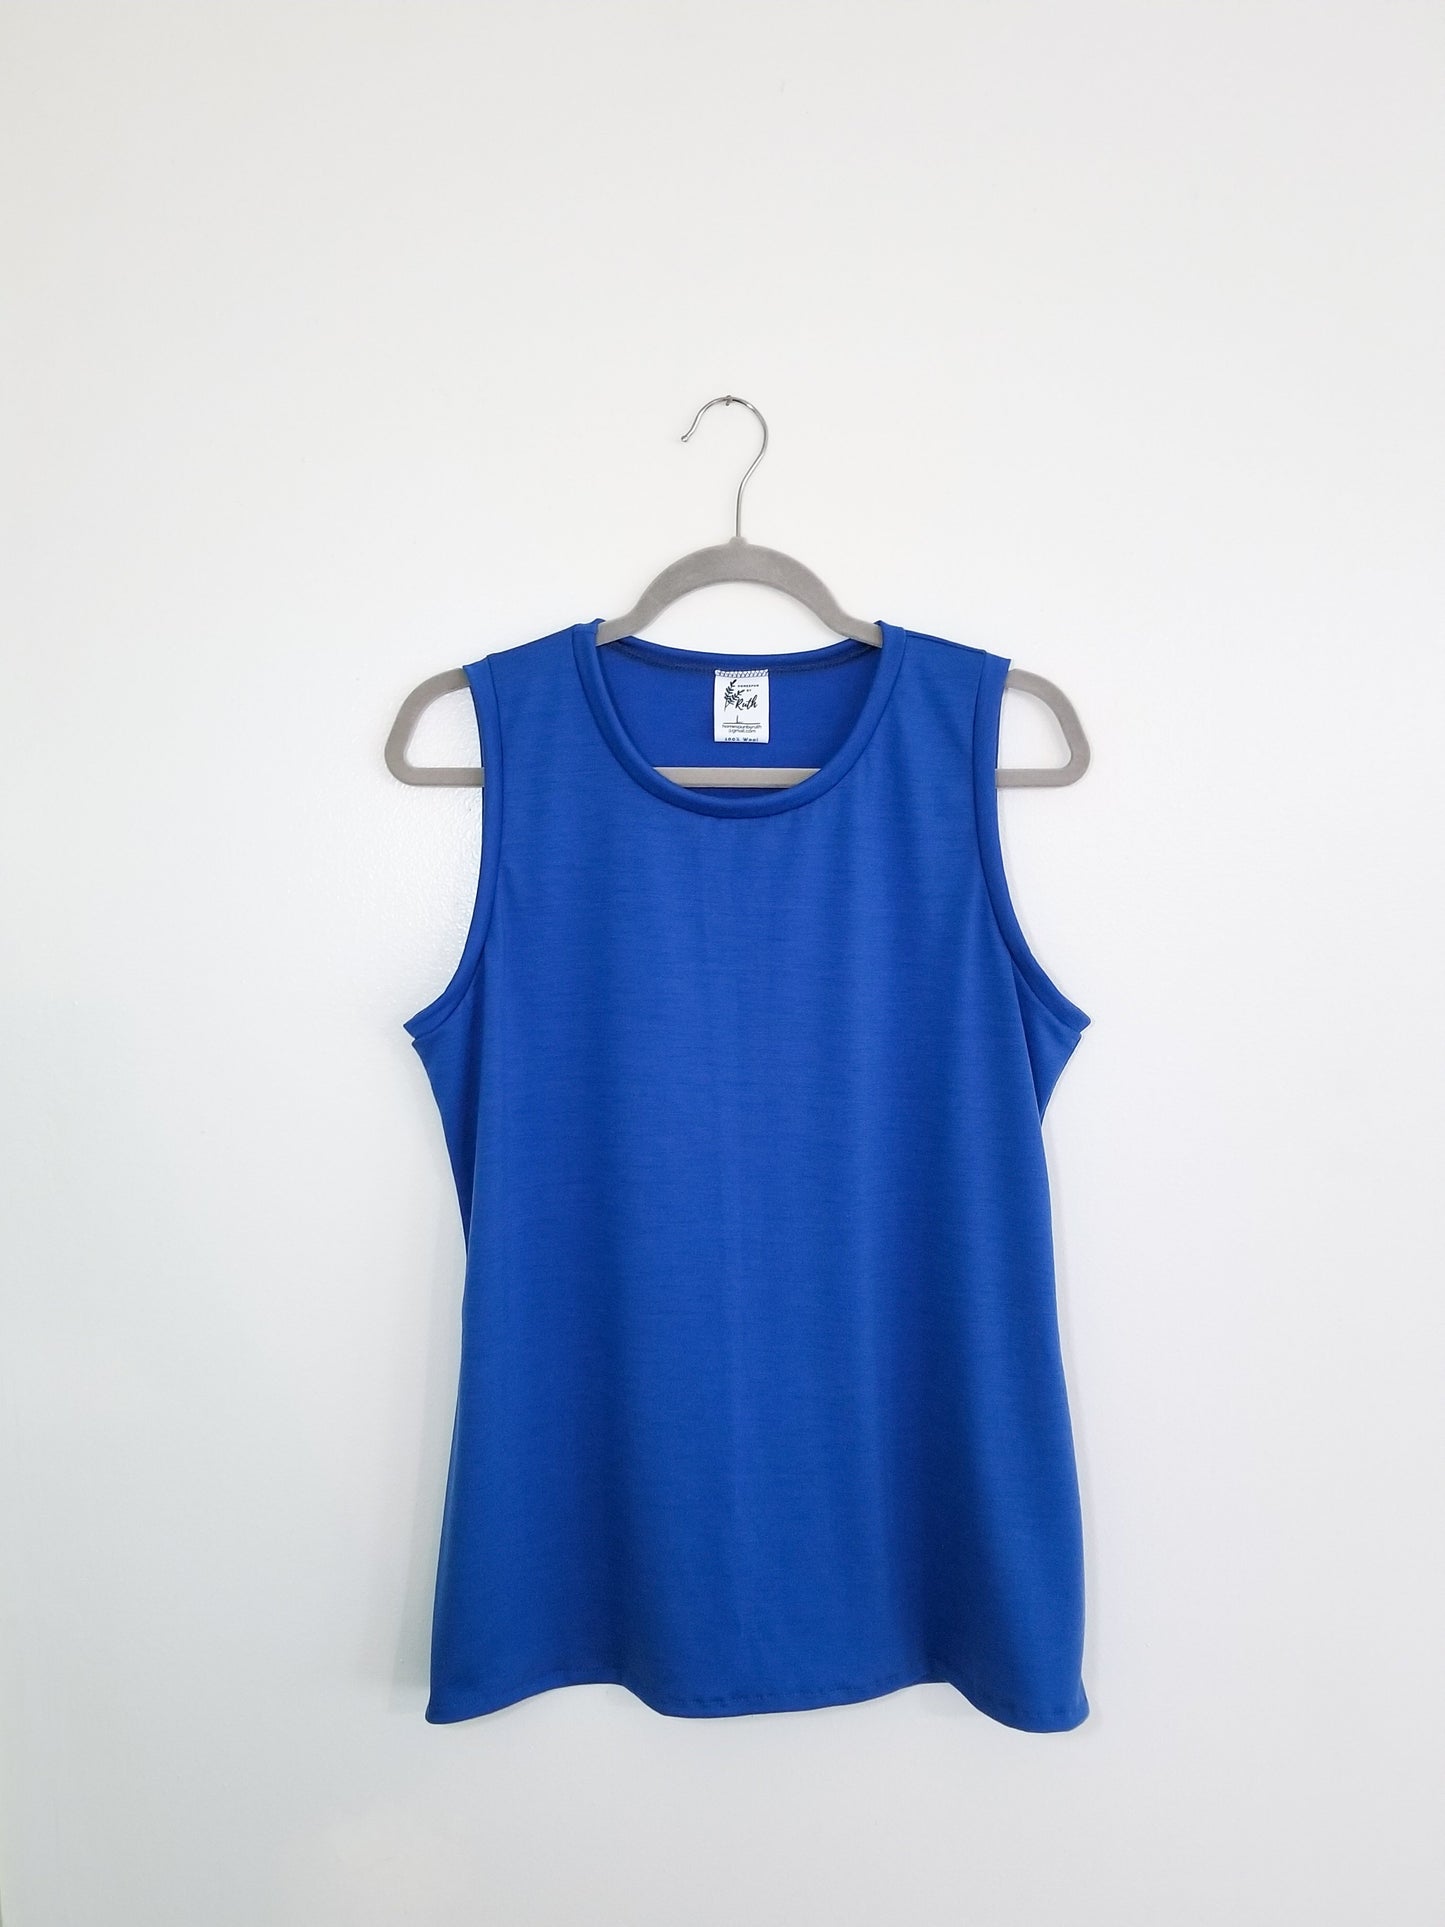 A women's blue 100% merino wool tank top hanging on a grey hanger against a white wall